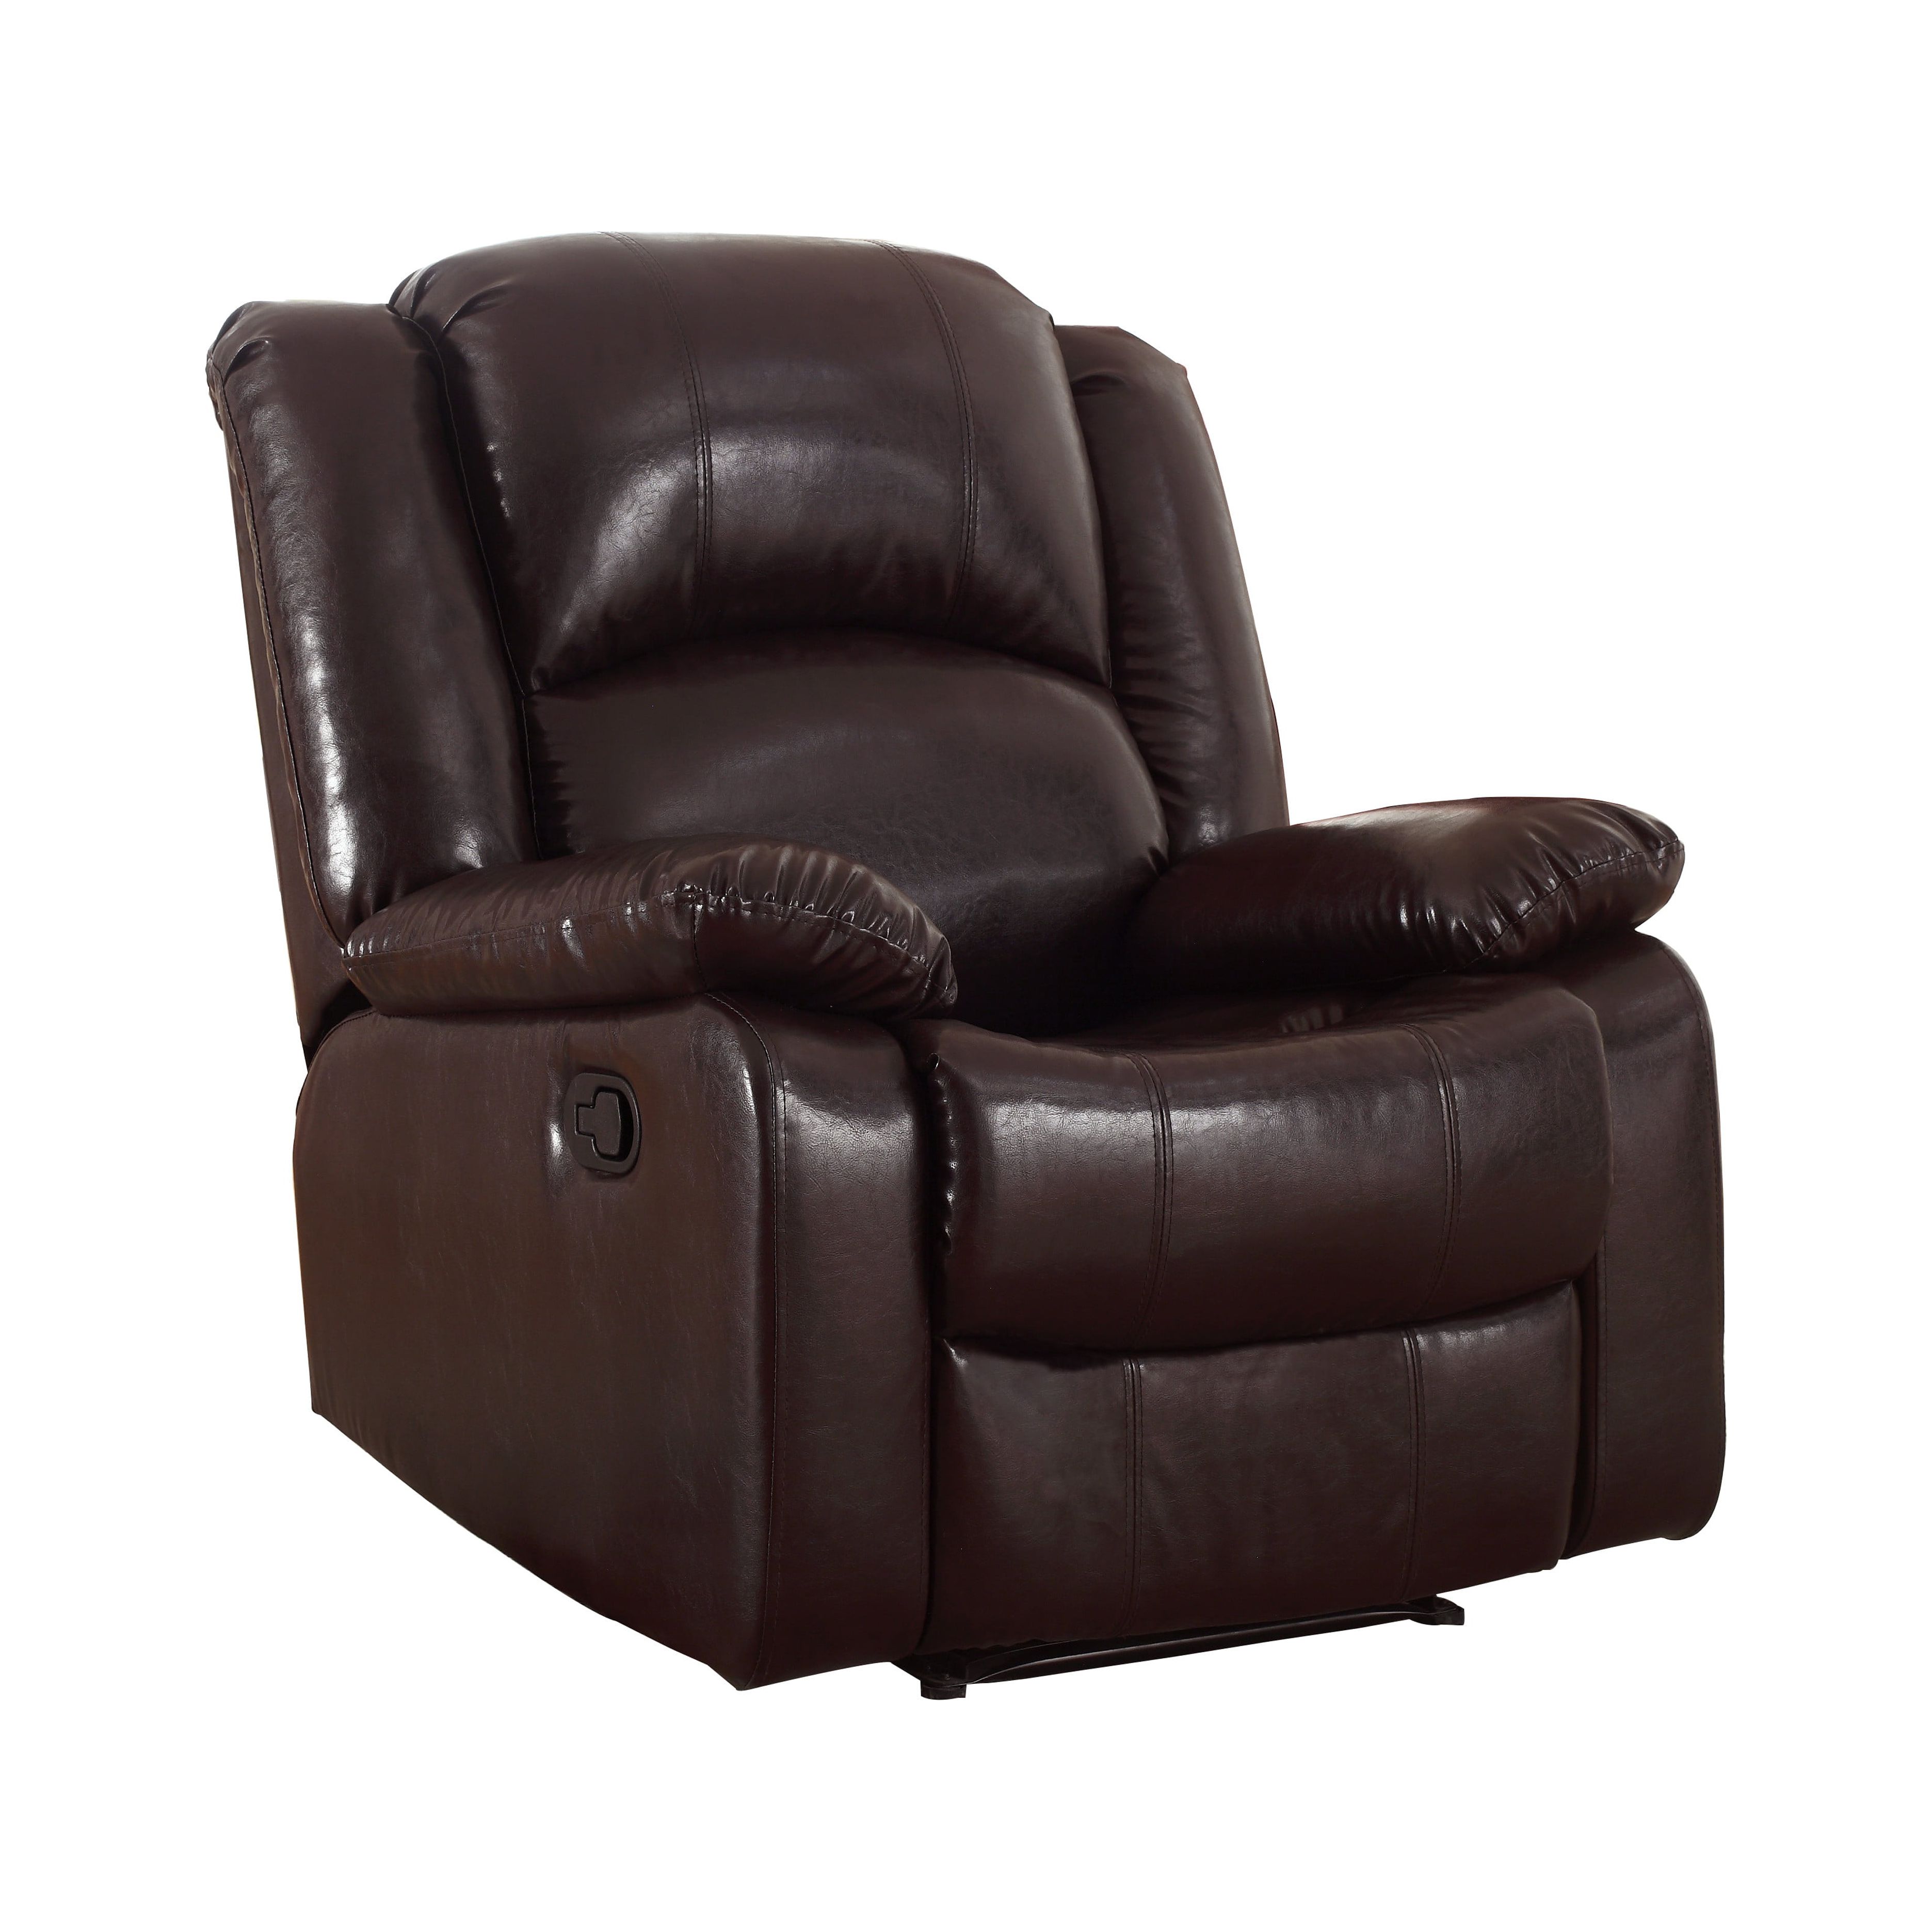 Leonel Signature Bonded Leather Glider Recliner, Multiple Colors - image 4 of 8